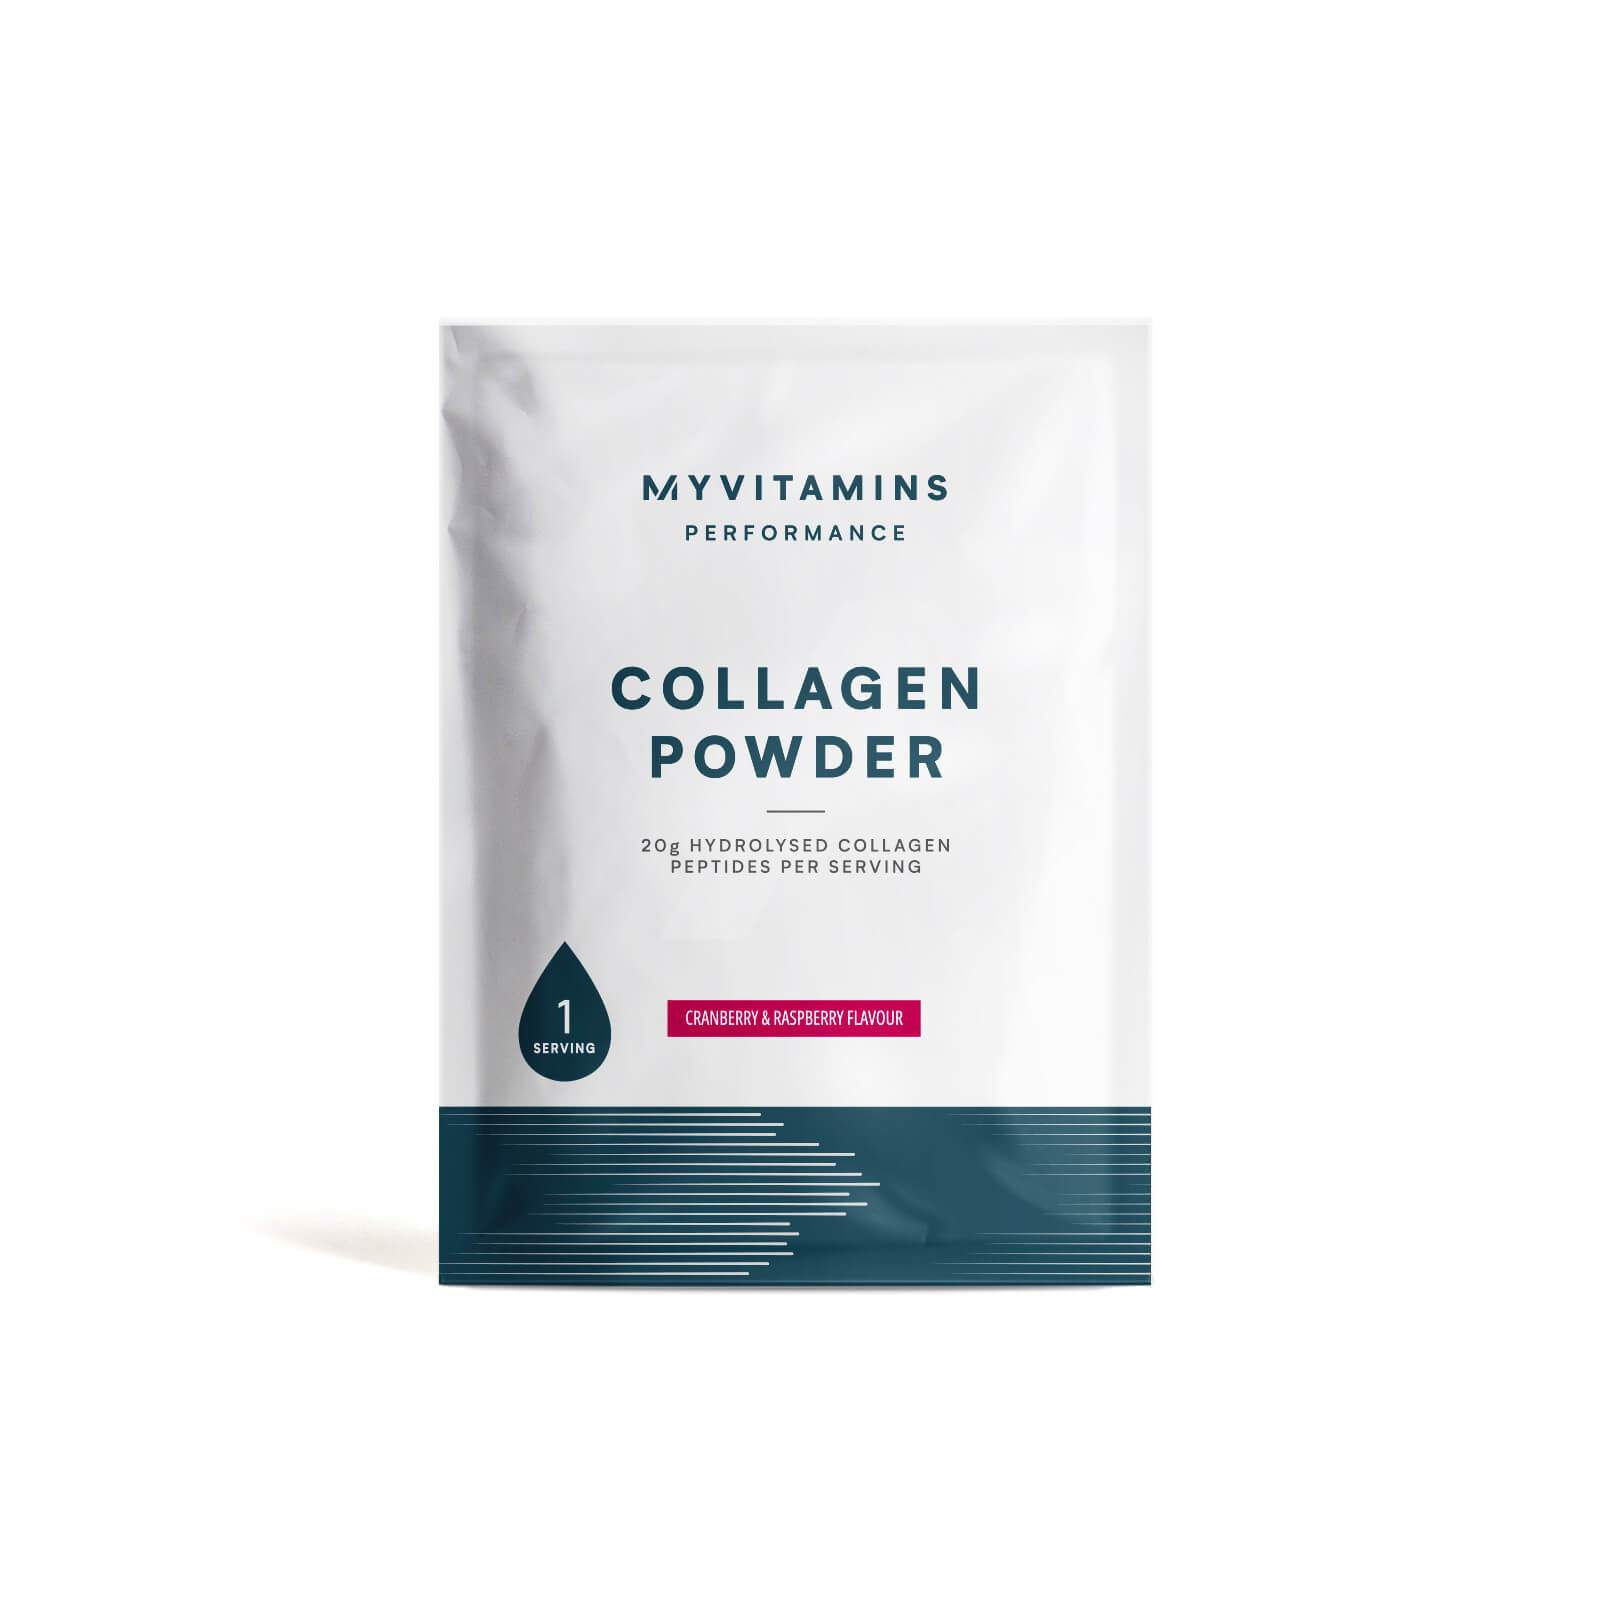 myvitamins collagen powder (sample) - 1servings - cranberry and raspberry